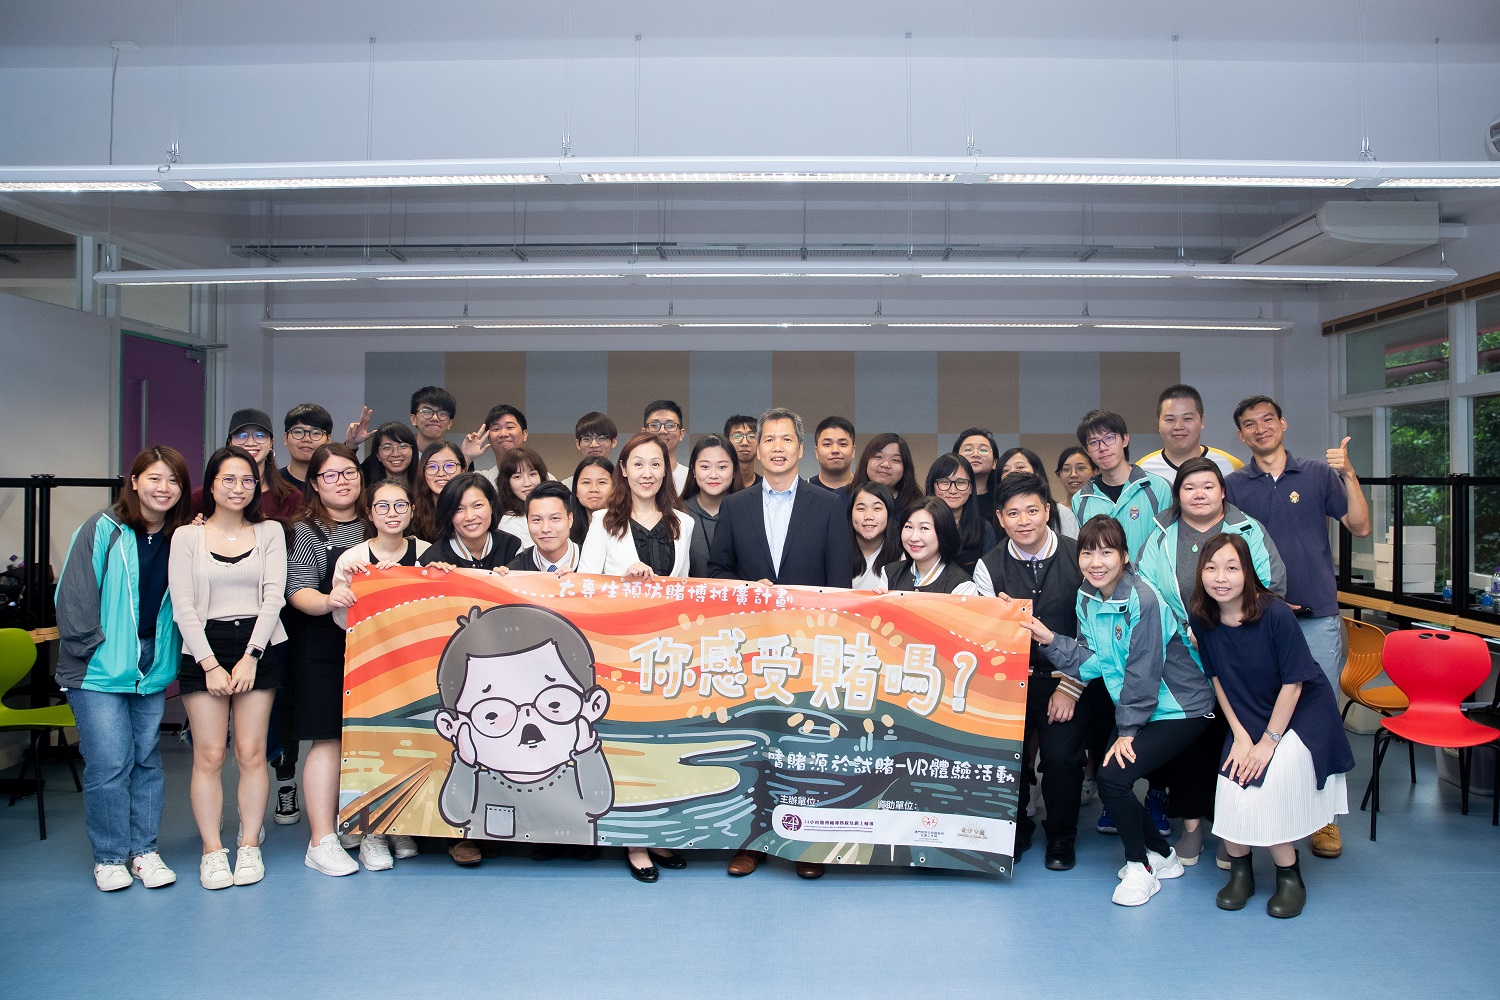 Sands China’s Responsible Gaming Ambassadors speak with students